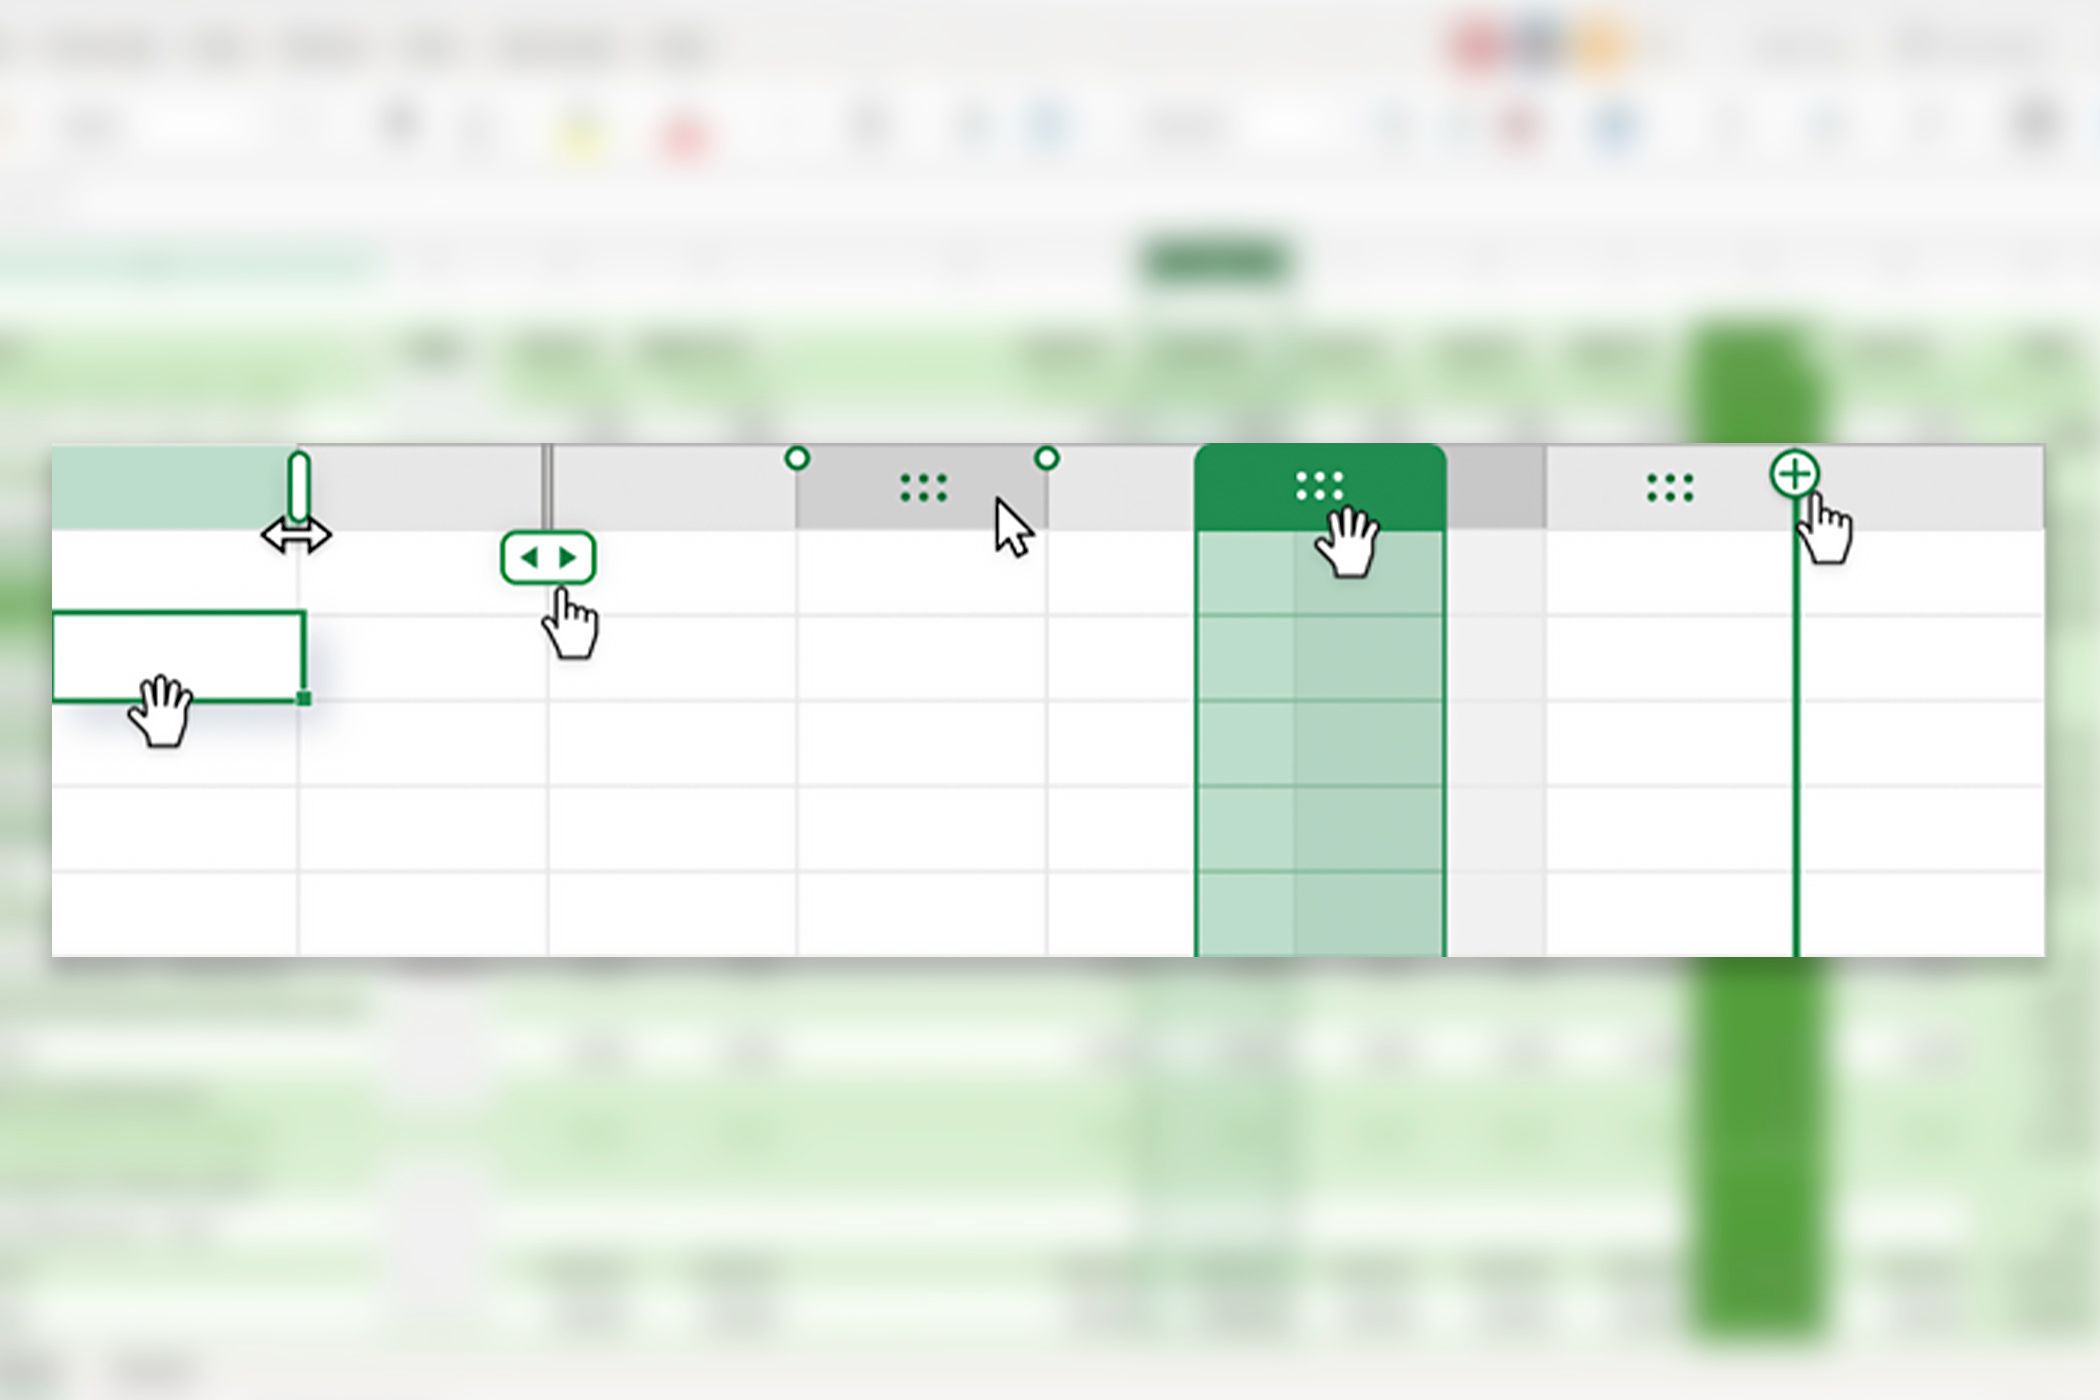 New mouse control options in web-based Excel.